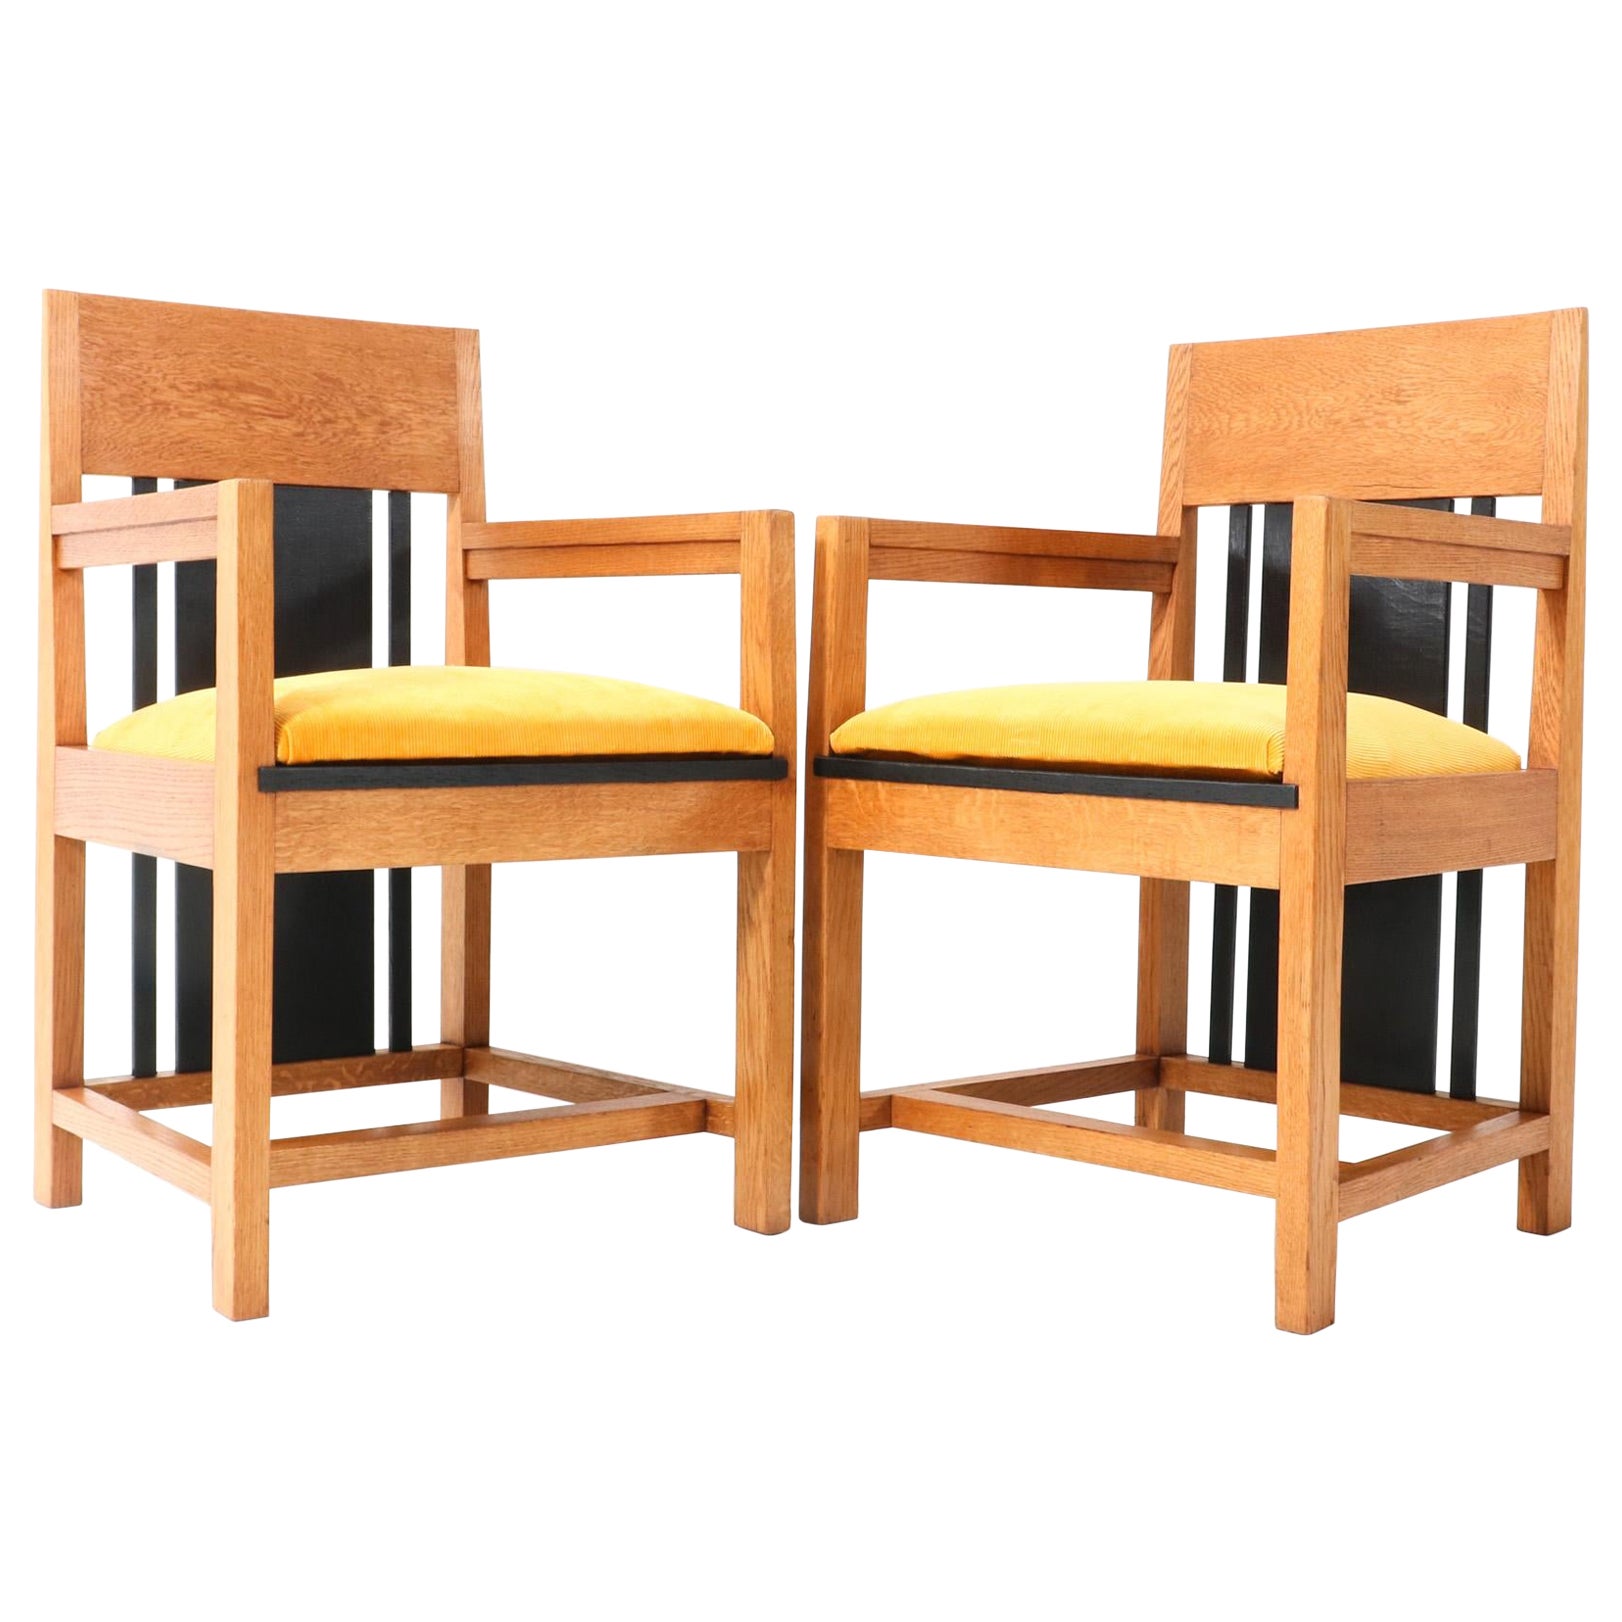 Two Oak Art Deco Modernist High Back  Armchairs by Cor Alons, 1927 For Sale